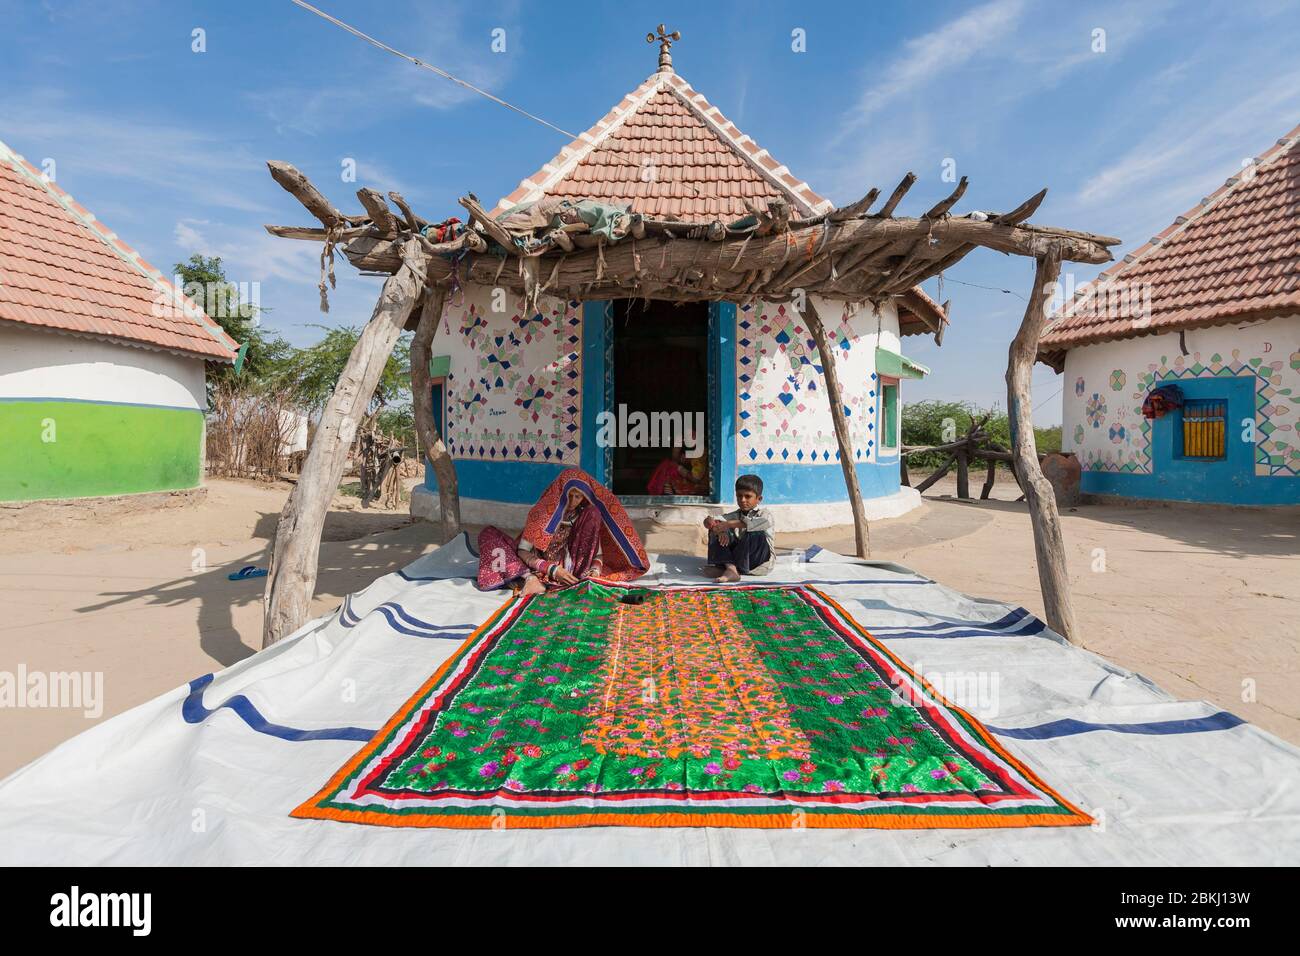 India, Gujarat State, Kutch region, Adipur village, nearby Bhuj city, Meghwal tribal woman wearing traditional embroidered clothes in front of hut decorated with colorful patterns Stock Photo